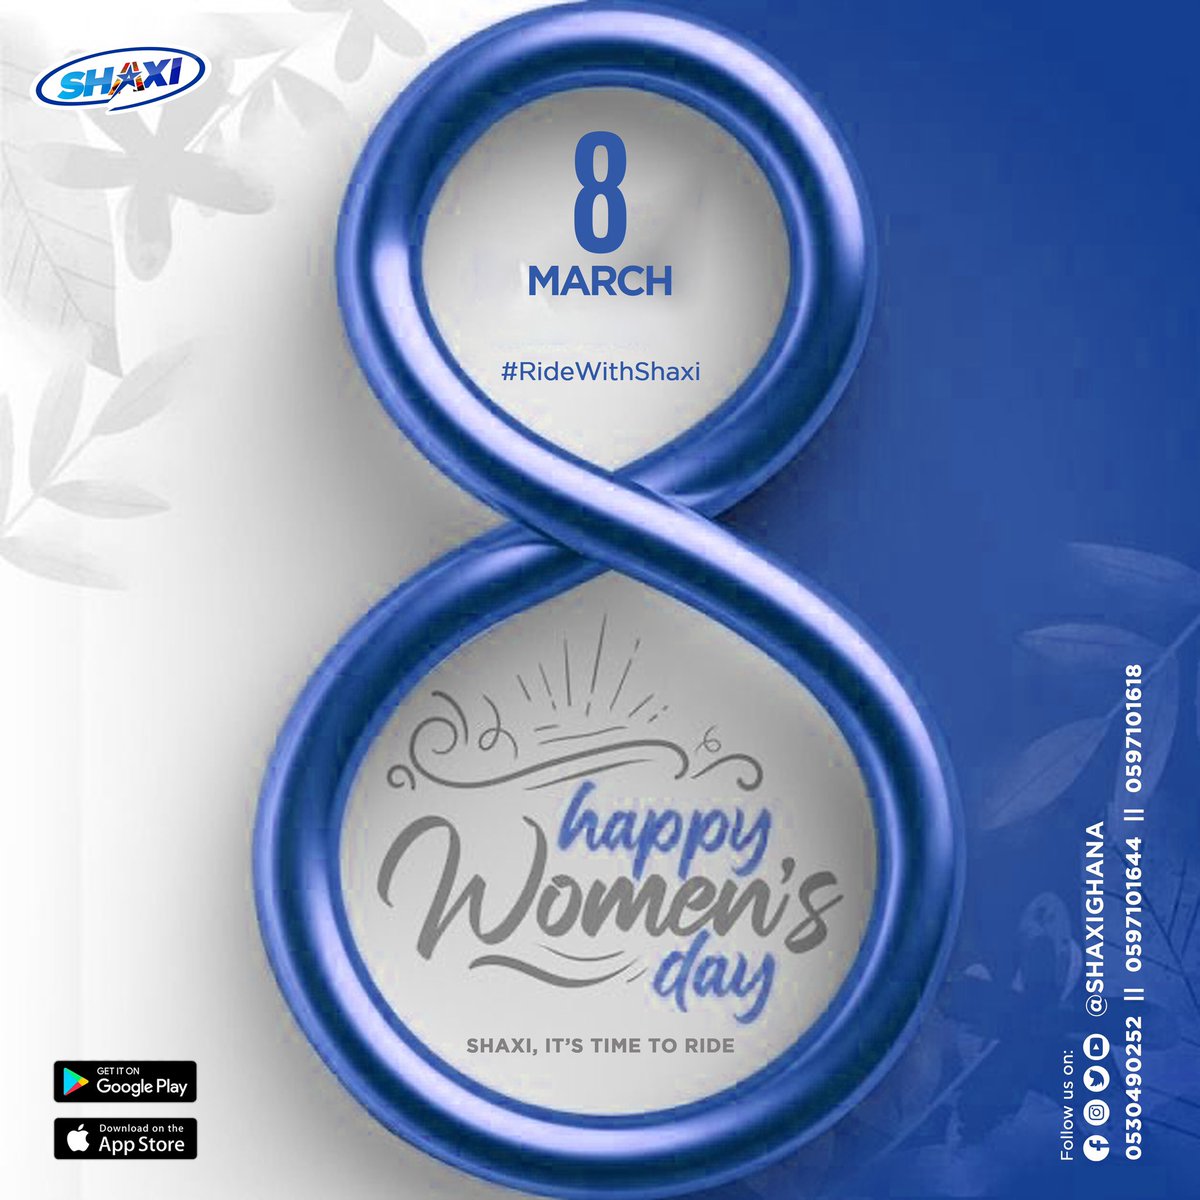 Cheers to the unstoppable women shaping the world #happywomensday #shaxi it’s time to ride !! #shaxi